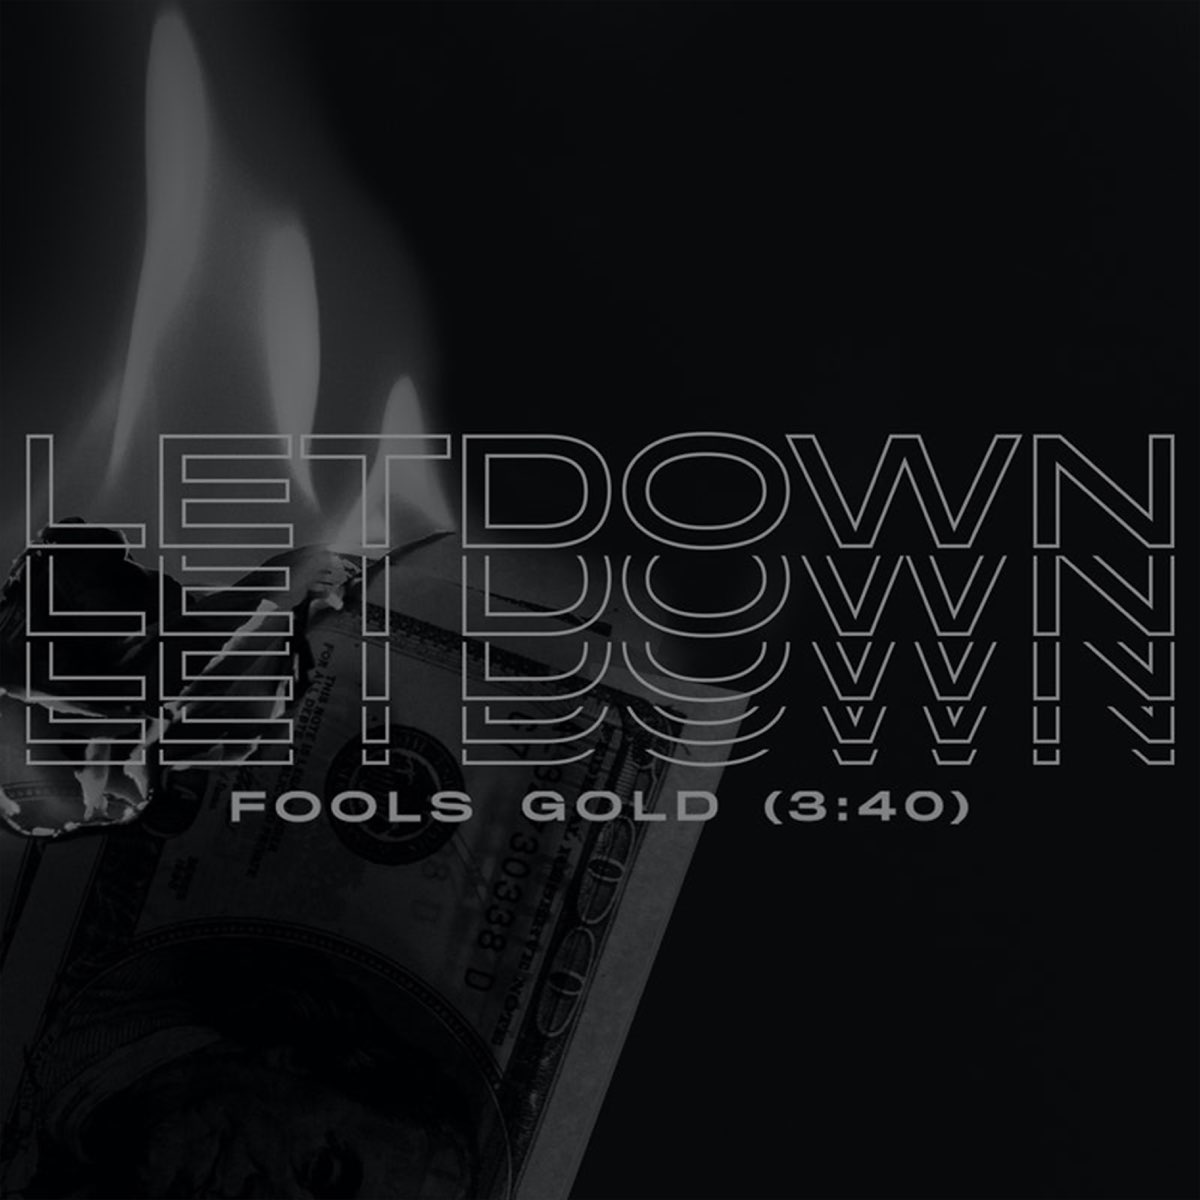 Fool's Gold letdown.. Christie Fools Gold. Рок letdown участники. Fools Gold Cover.